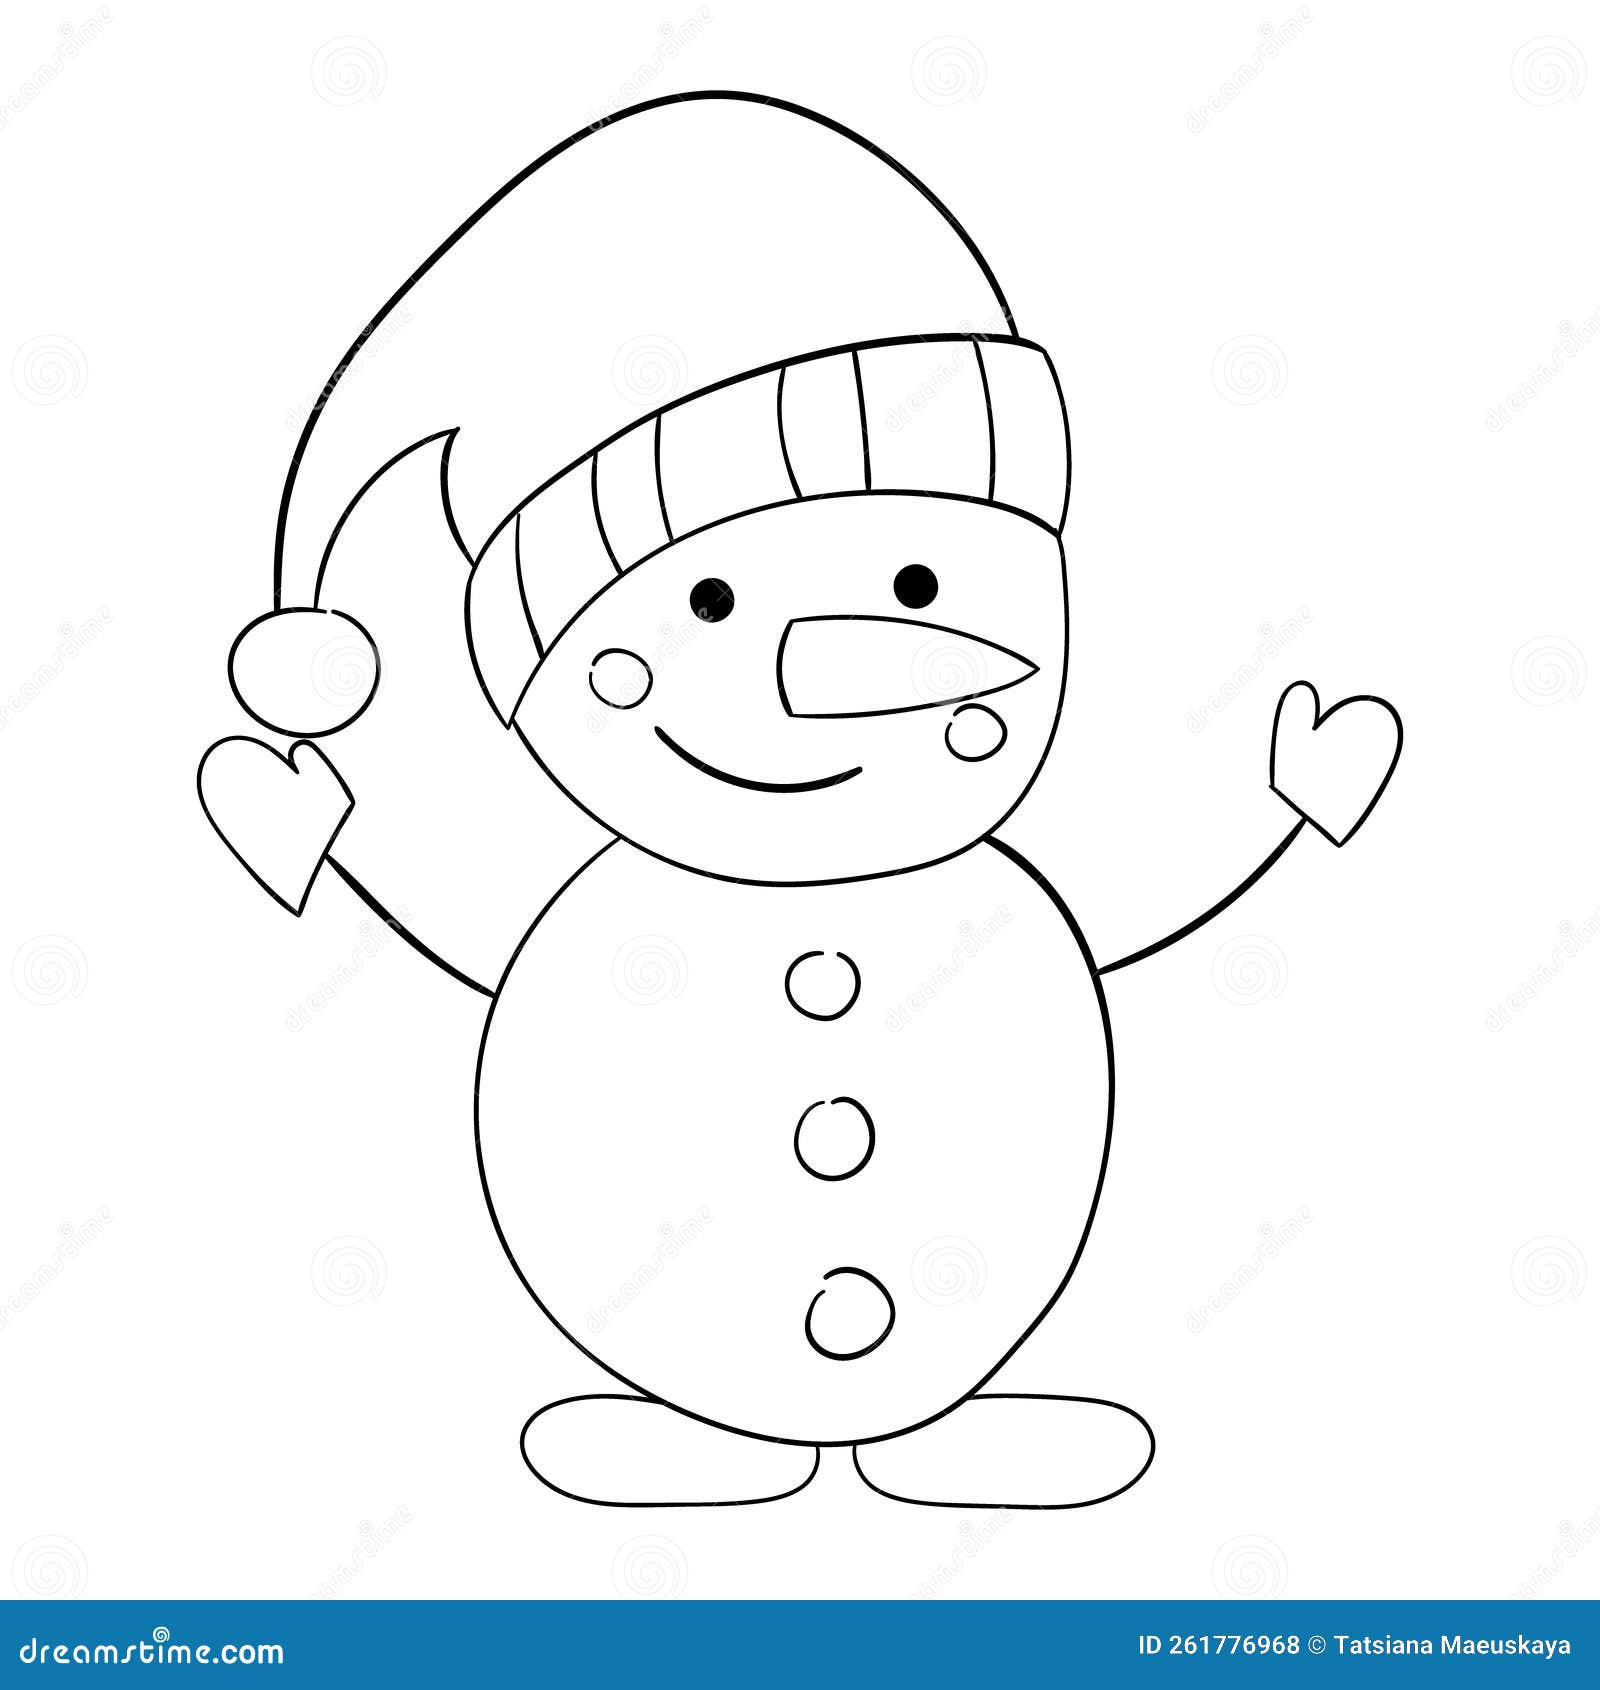 Cute cartoon snowman with a thin line. Vector illustration of a doodle.